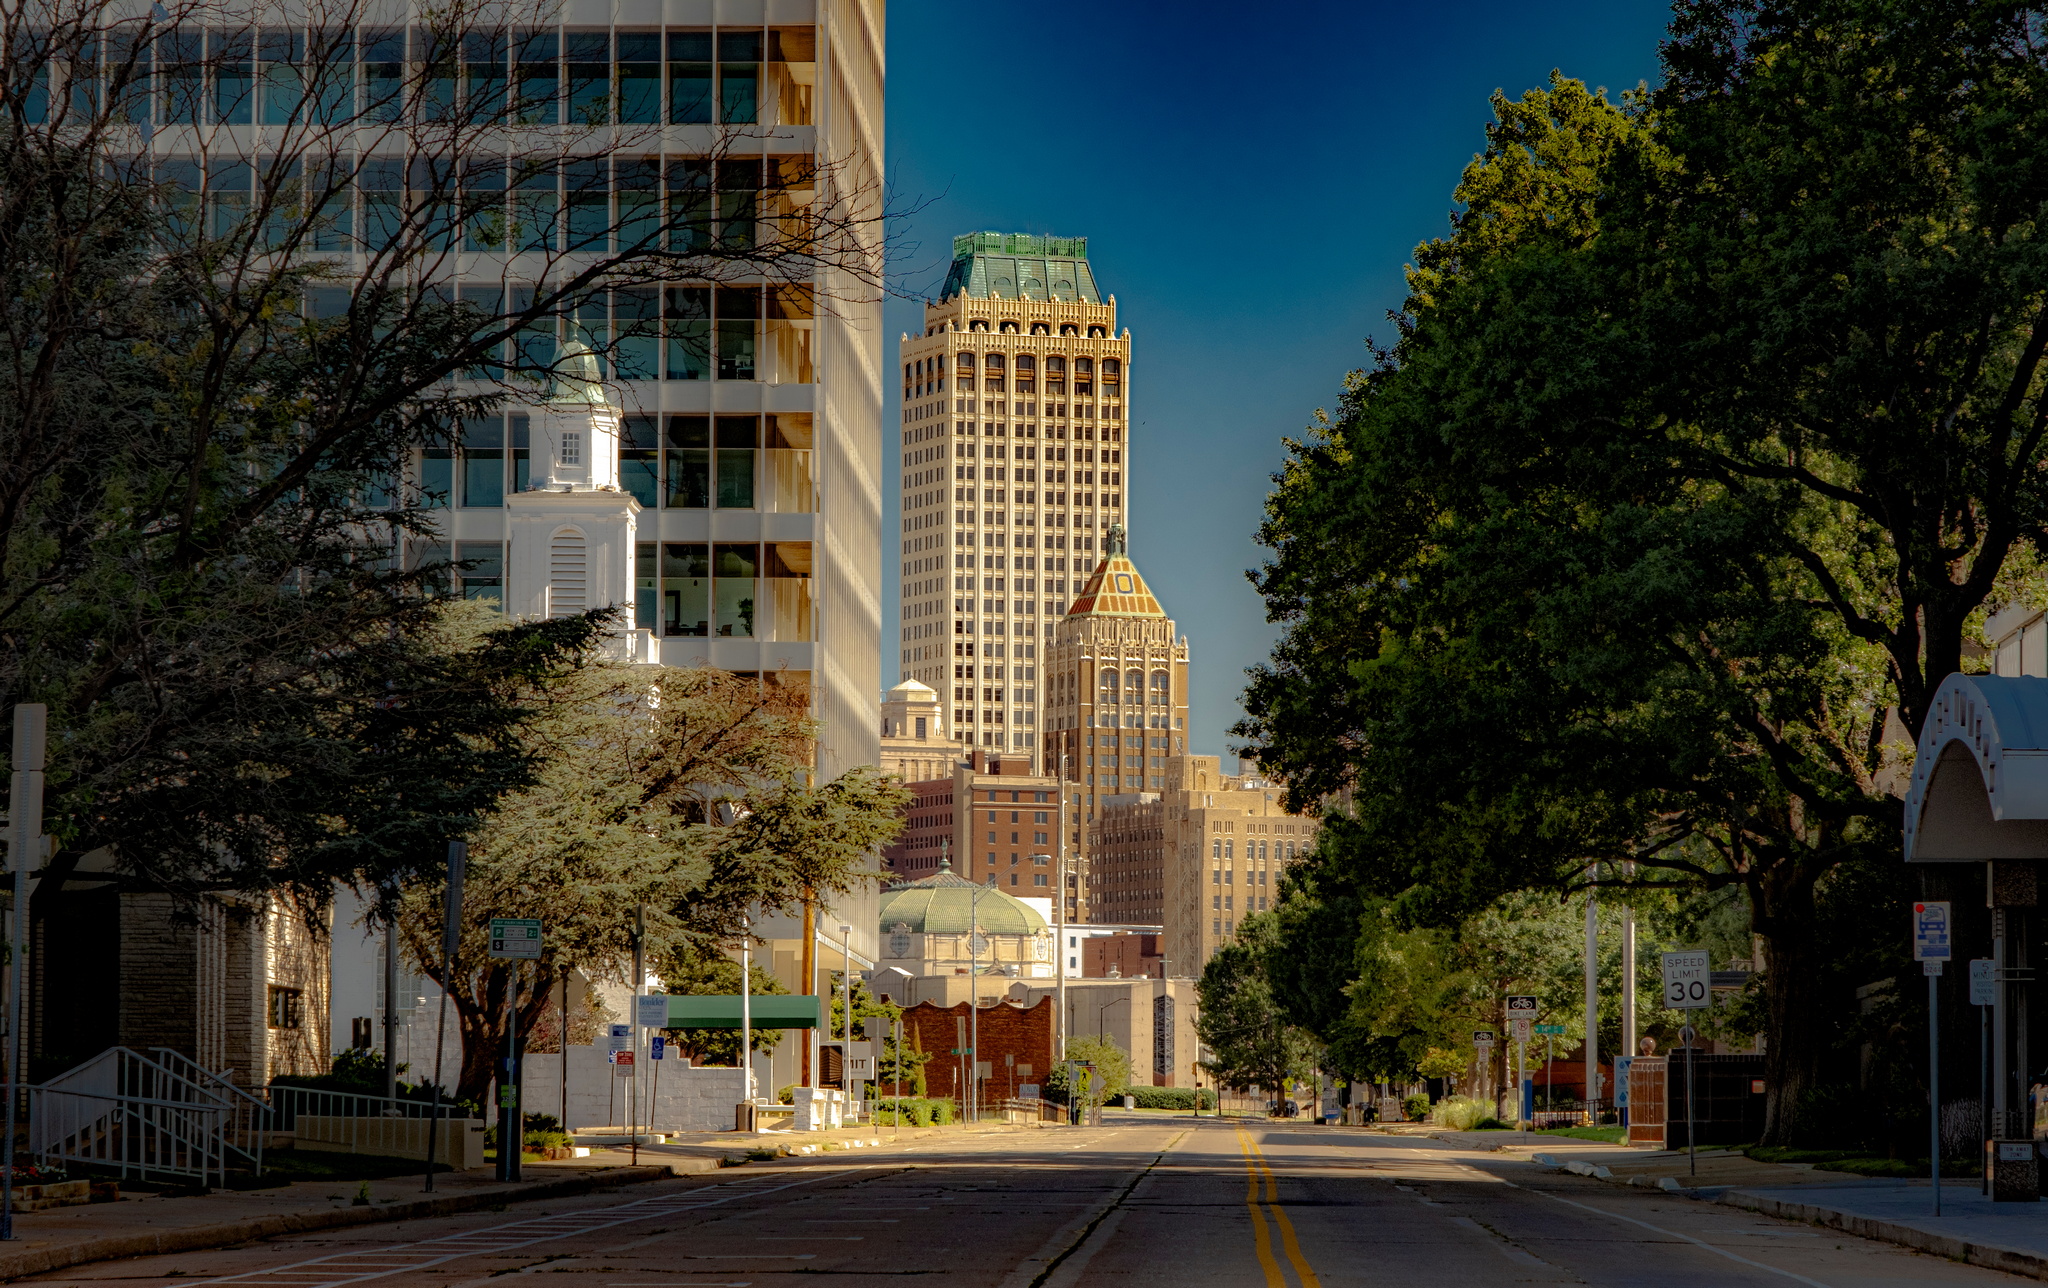 downtown Tulsa with buildings, trees, along a street.